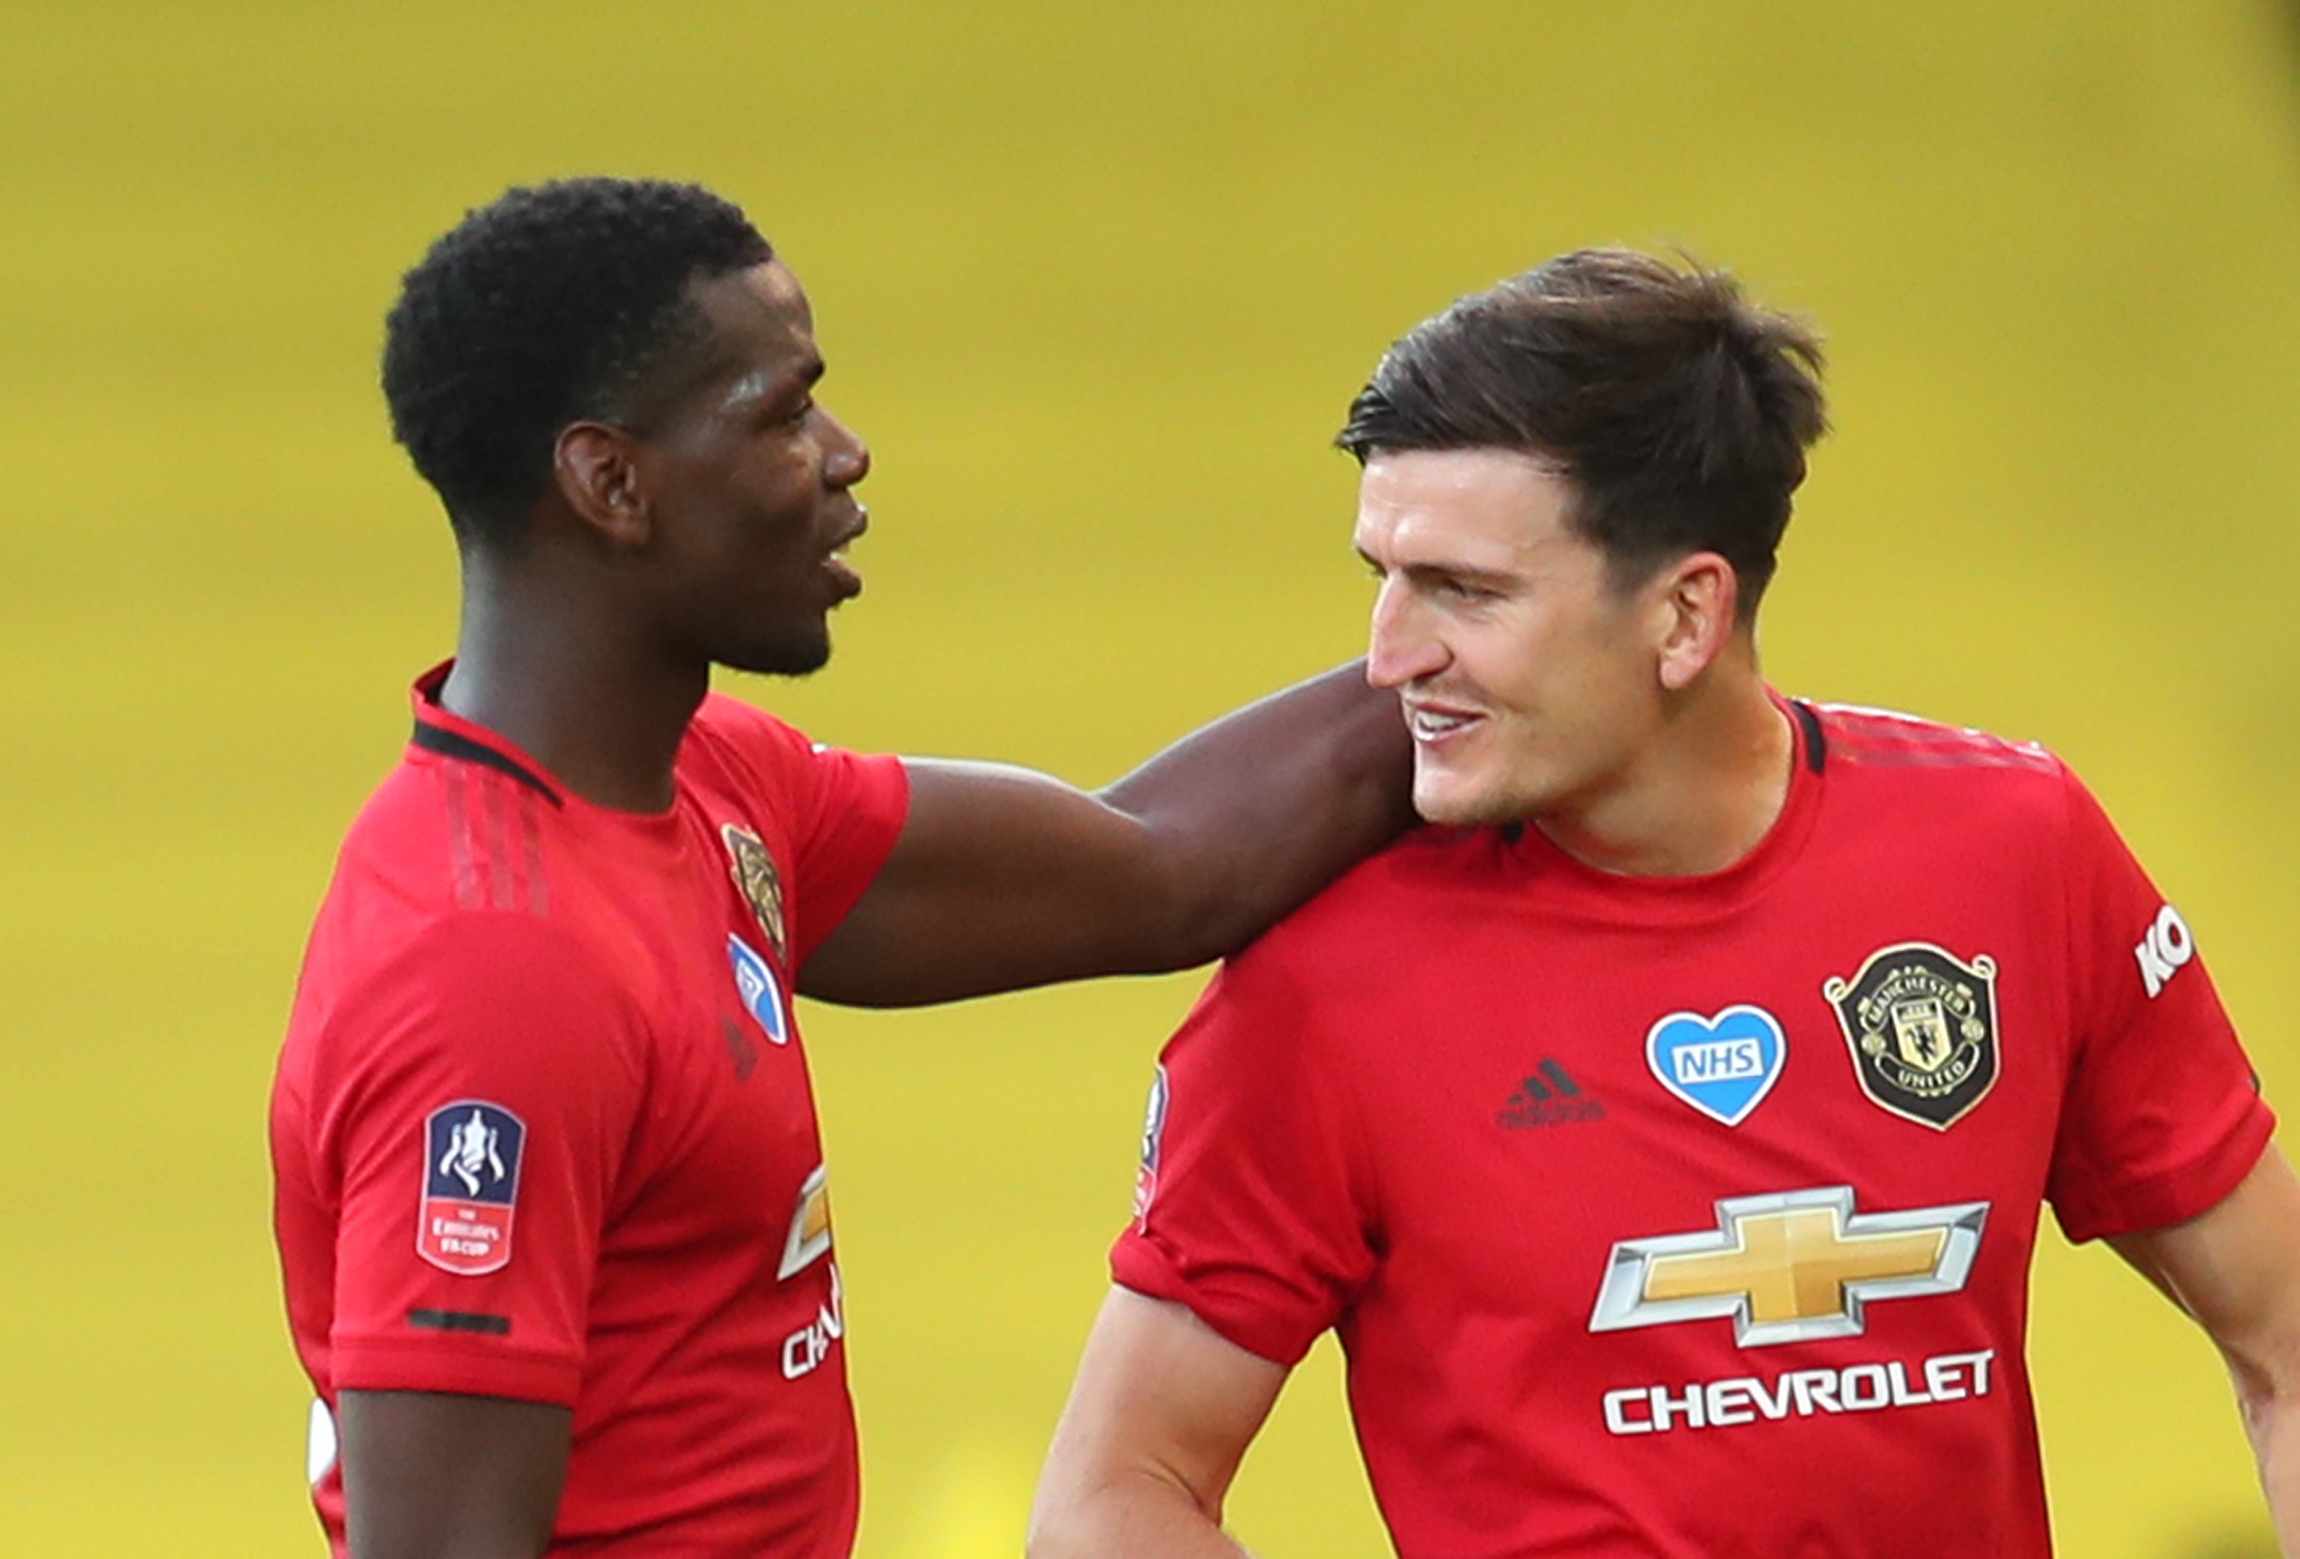 Manchester United's Harry Maguire and Paul Pogba celebrate after the match, as play resumes behind closed doors following the outbreak of the coronavirus disease (COVID-19) during the FA Cup Quarter Final match between Norwich City and Manchester United, at Carrow Road, in Norwich, Britain, on June 27, 2020. Photo: Catherine Ivill/Pool via Reuters